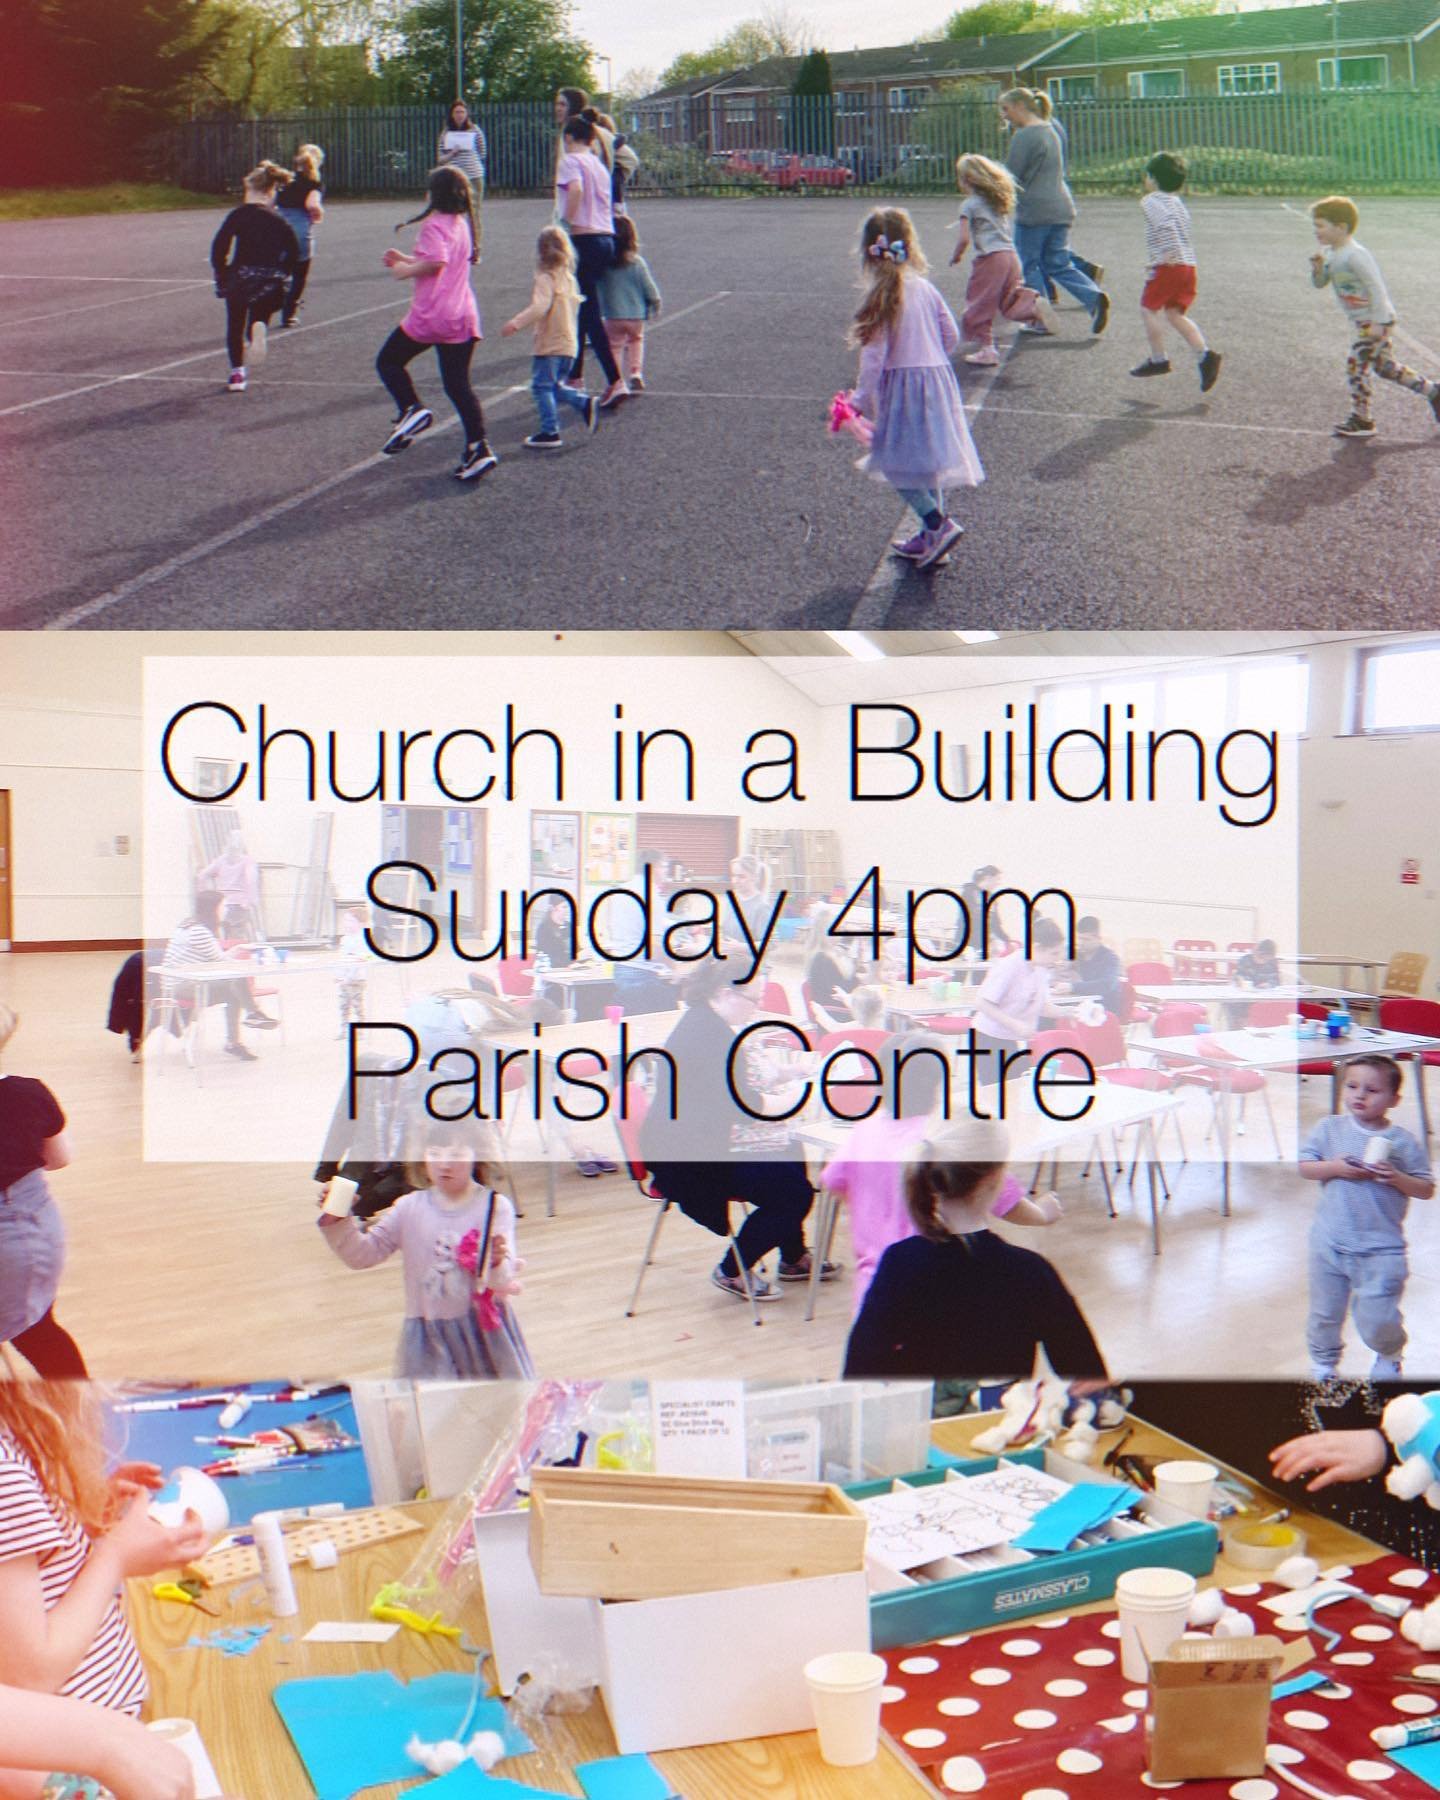 Join us on Sunday at 4pm for Church in a Building. Our weekly church service for families with crafts, games, songs and food. We&rsquo;d love to see you.